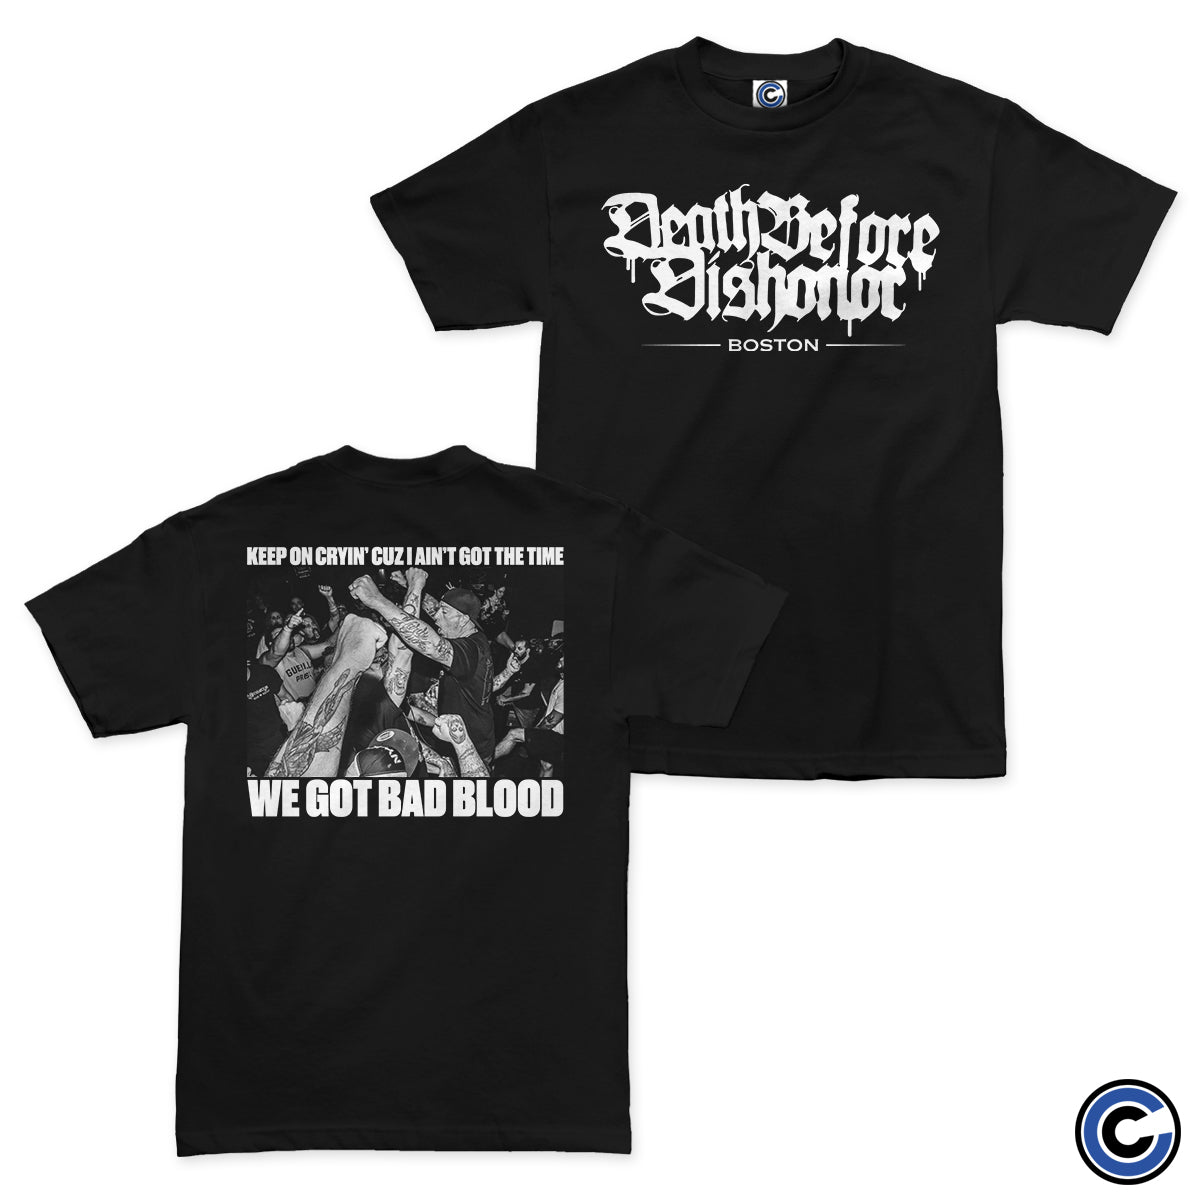 Death Before Dishonor "Bad Blood" Shirt